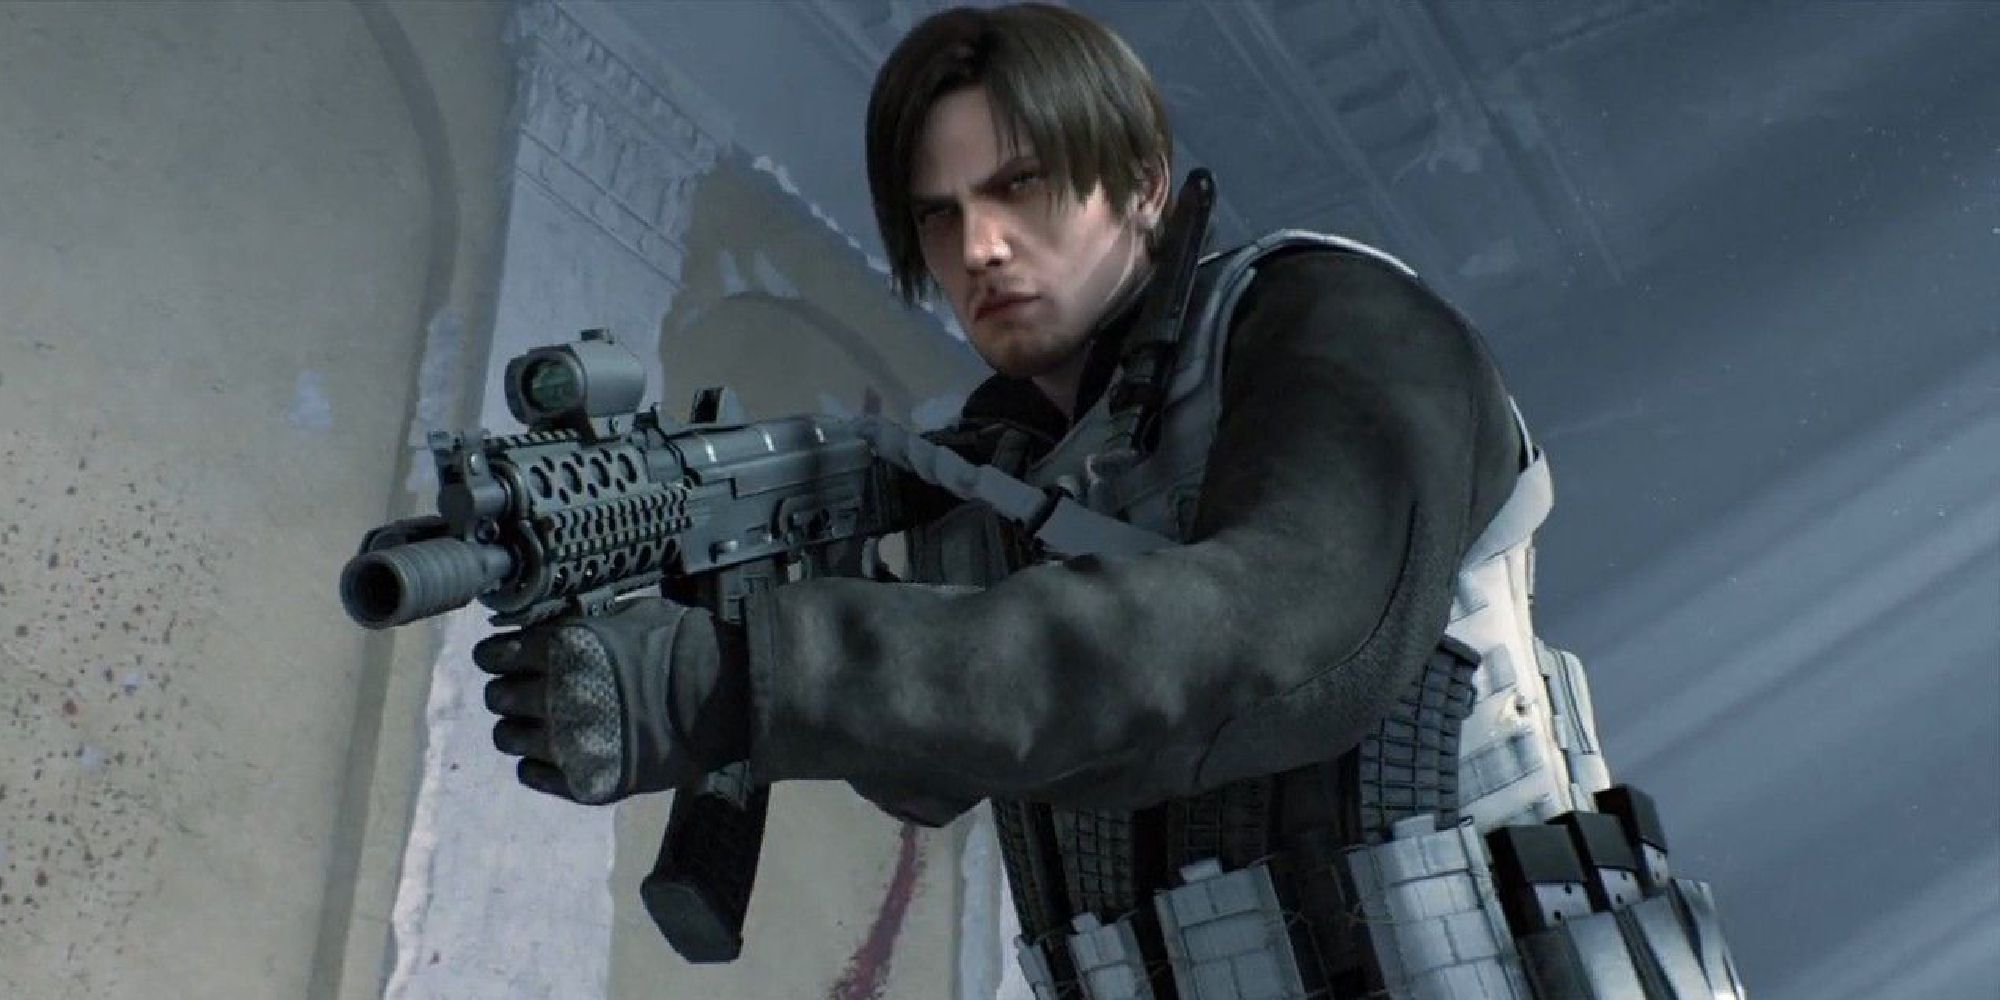 Leon holding a gun aimed down at an unseen enemy, a displeased scowl on his face. 